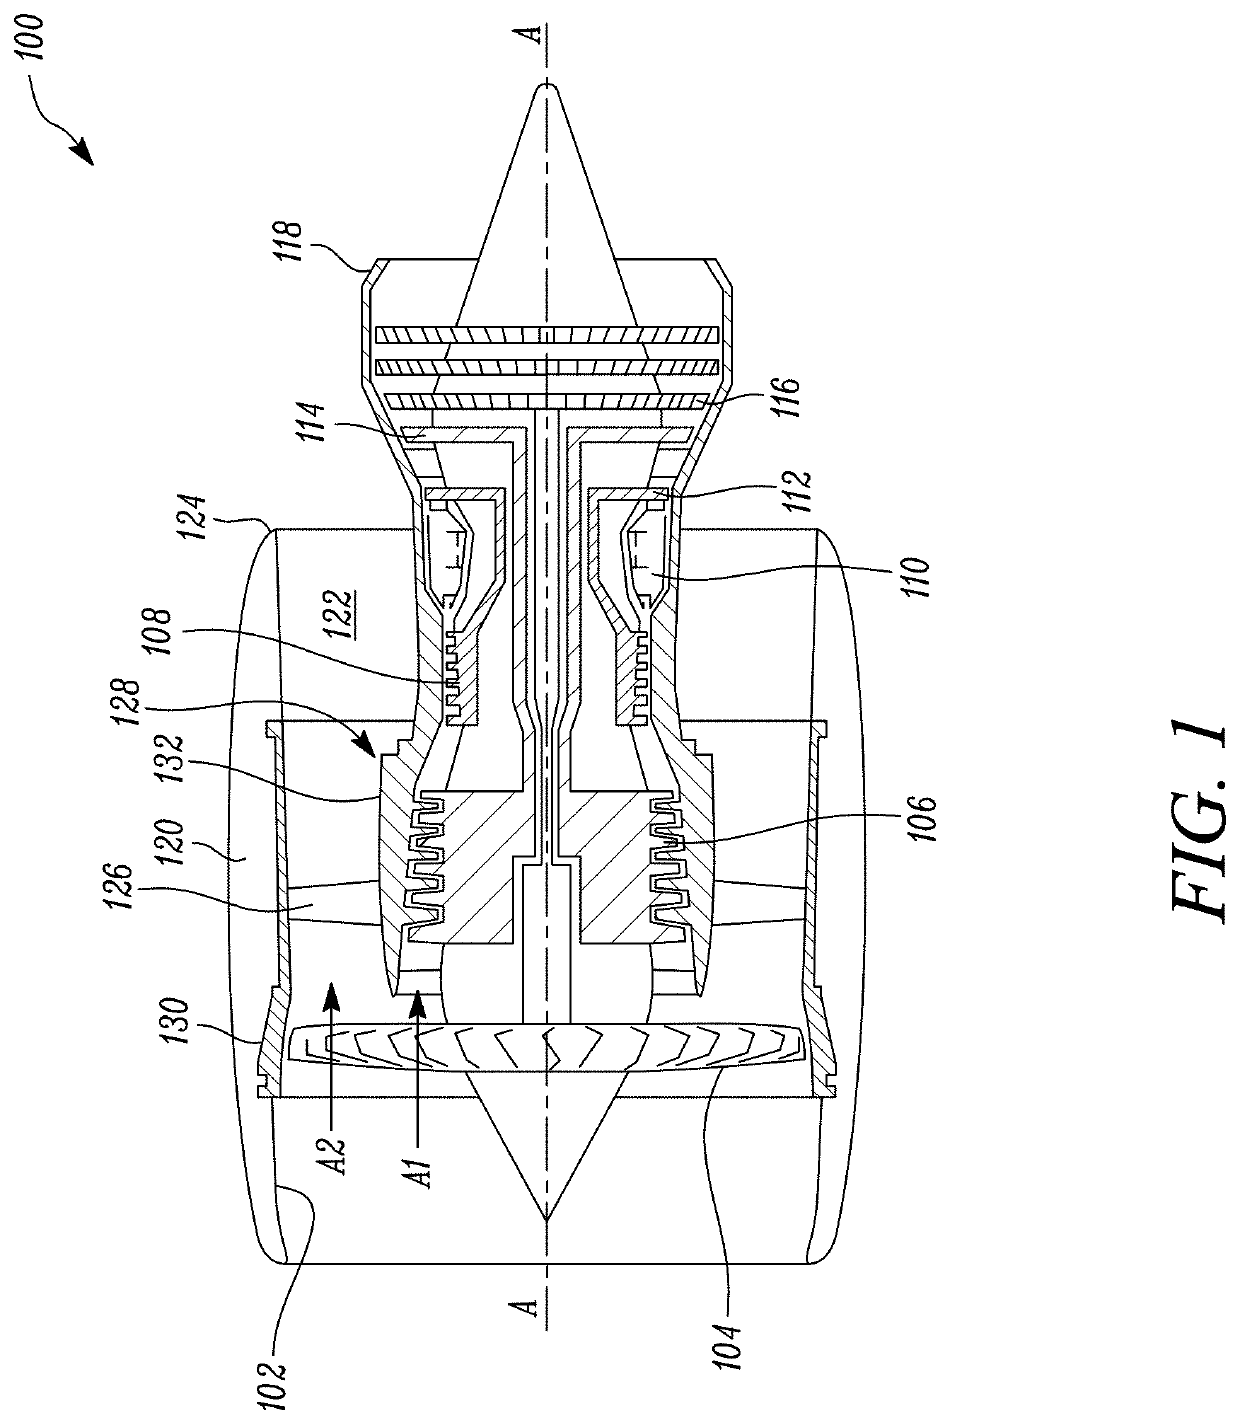 System and method for assembling components of a gas turbine engine